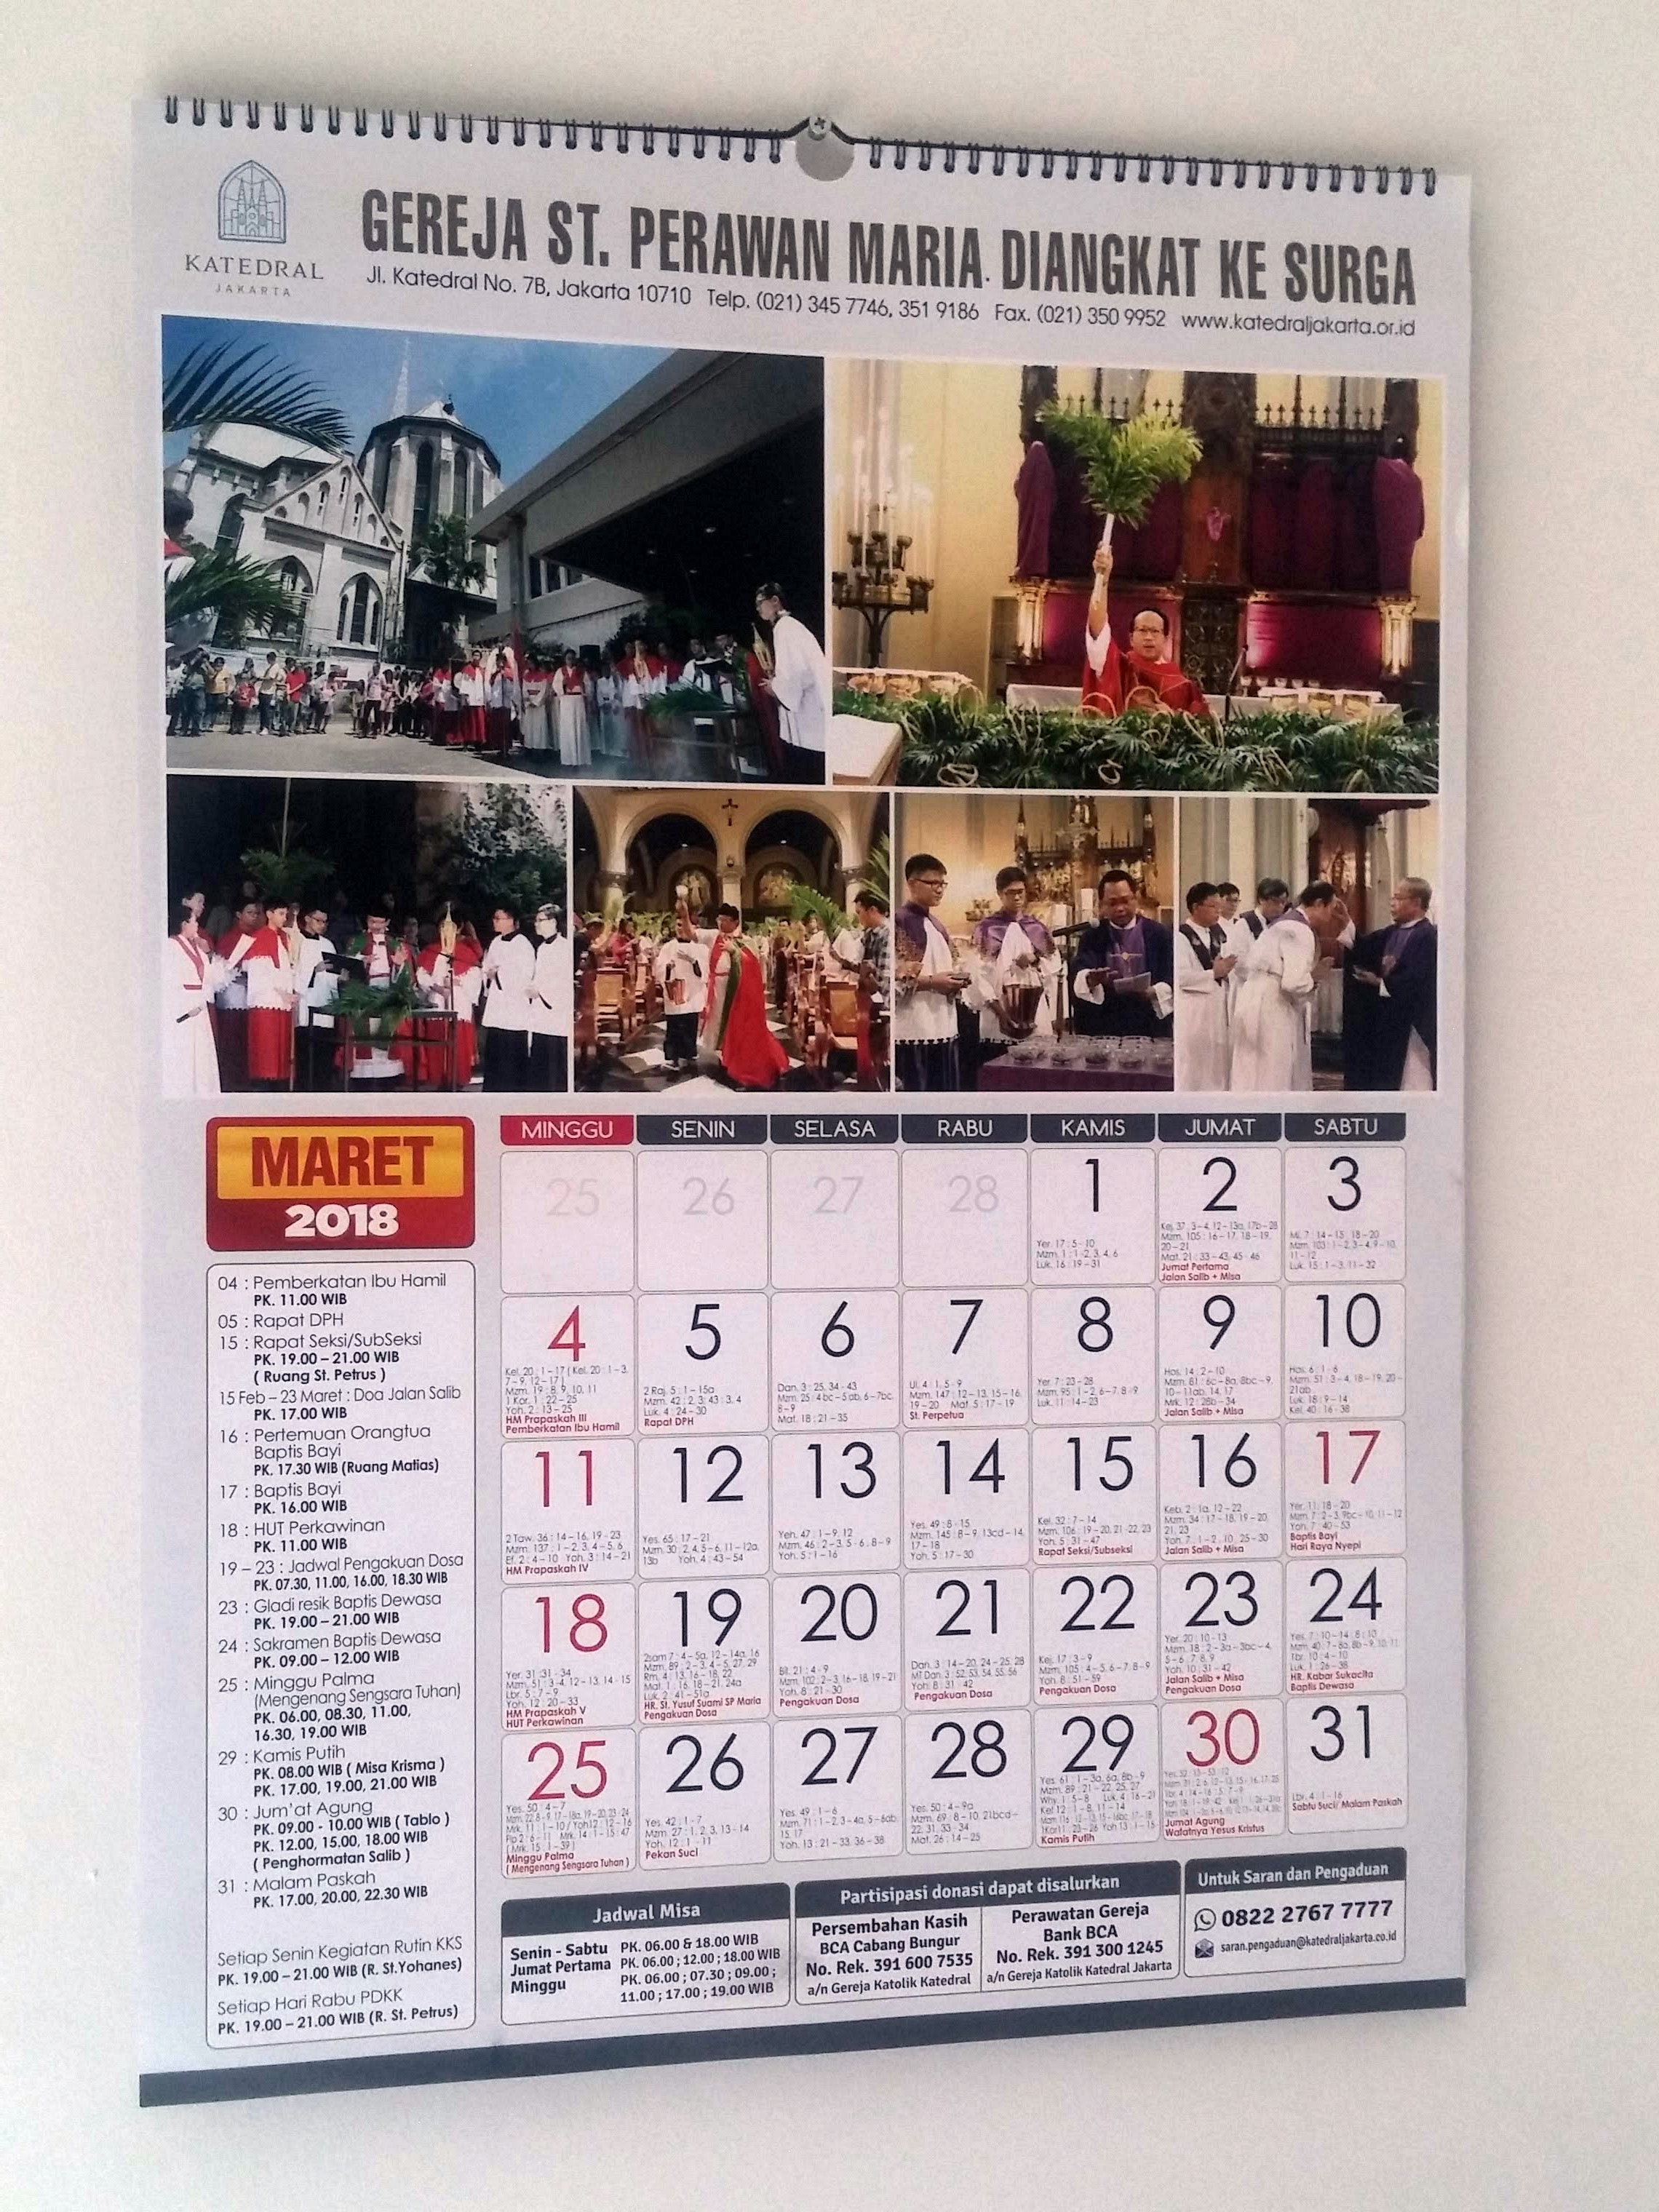 A calendar with different events marked